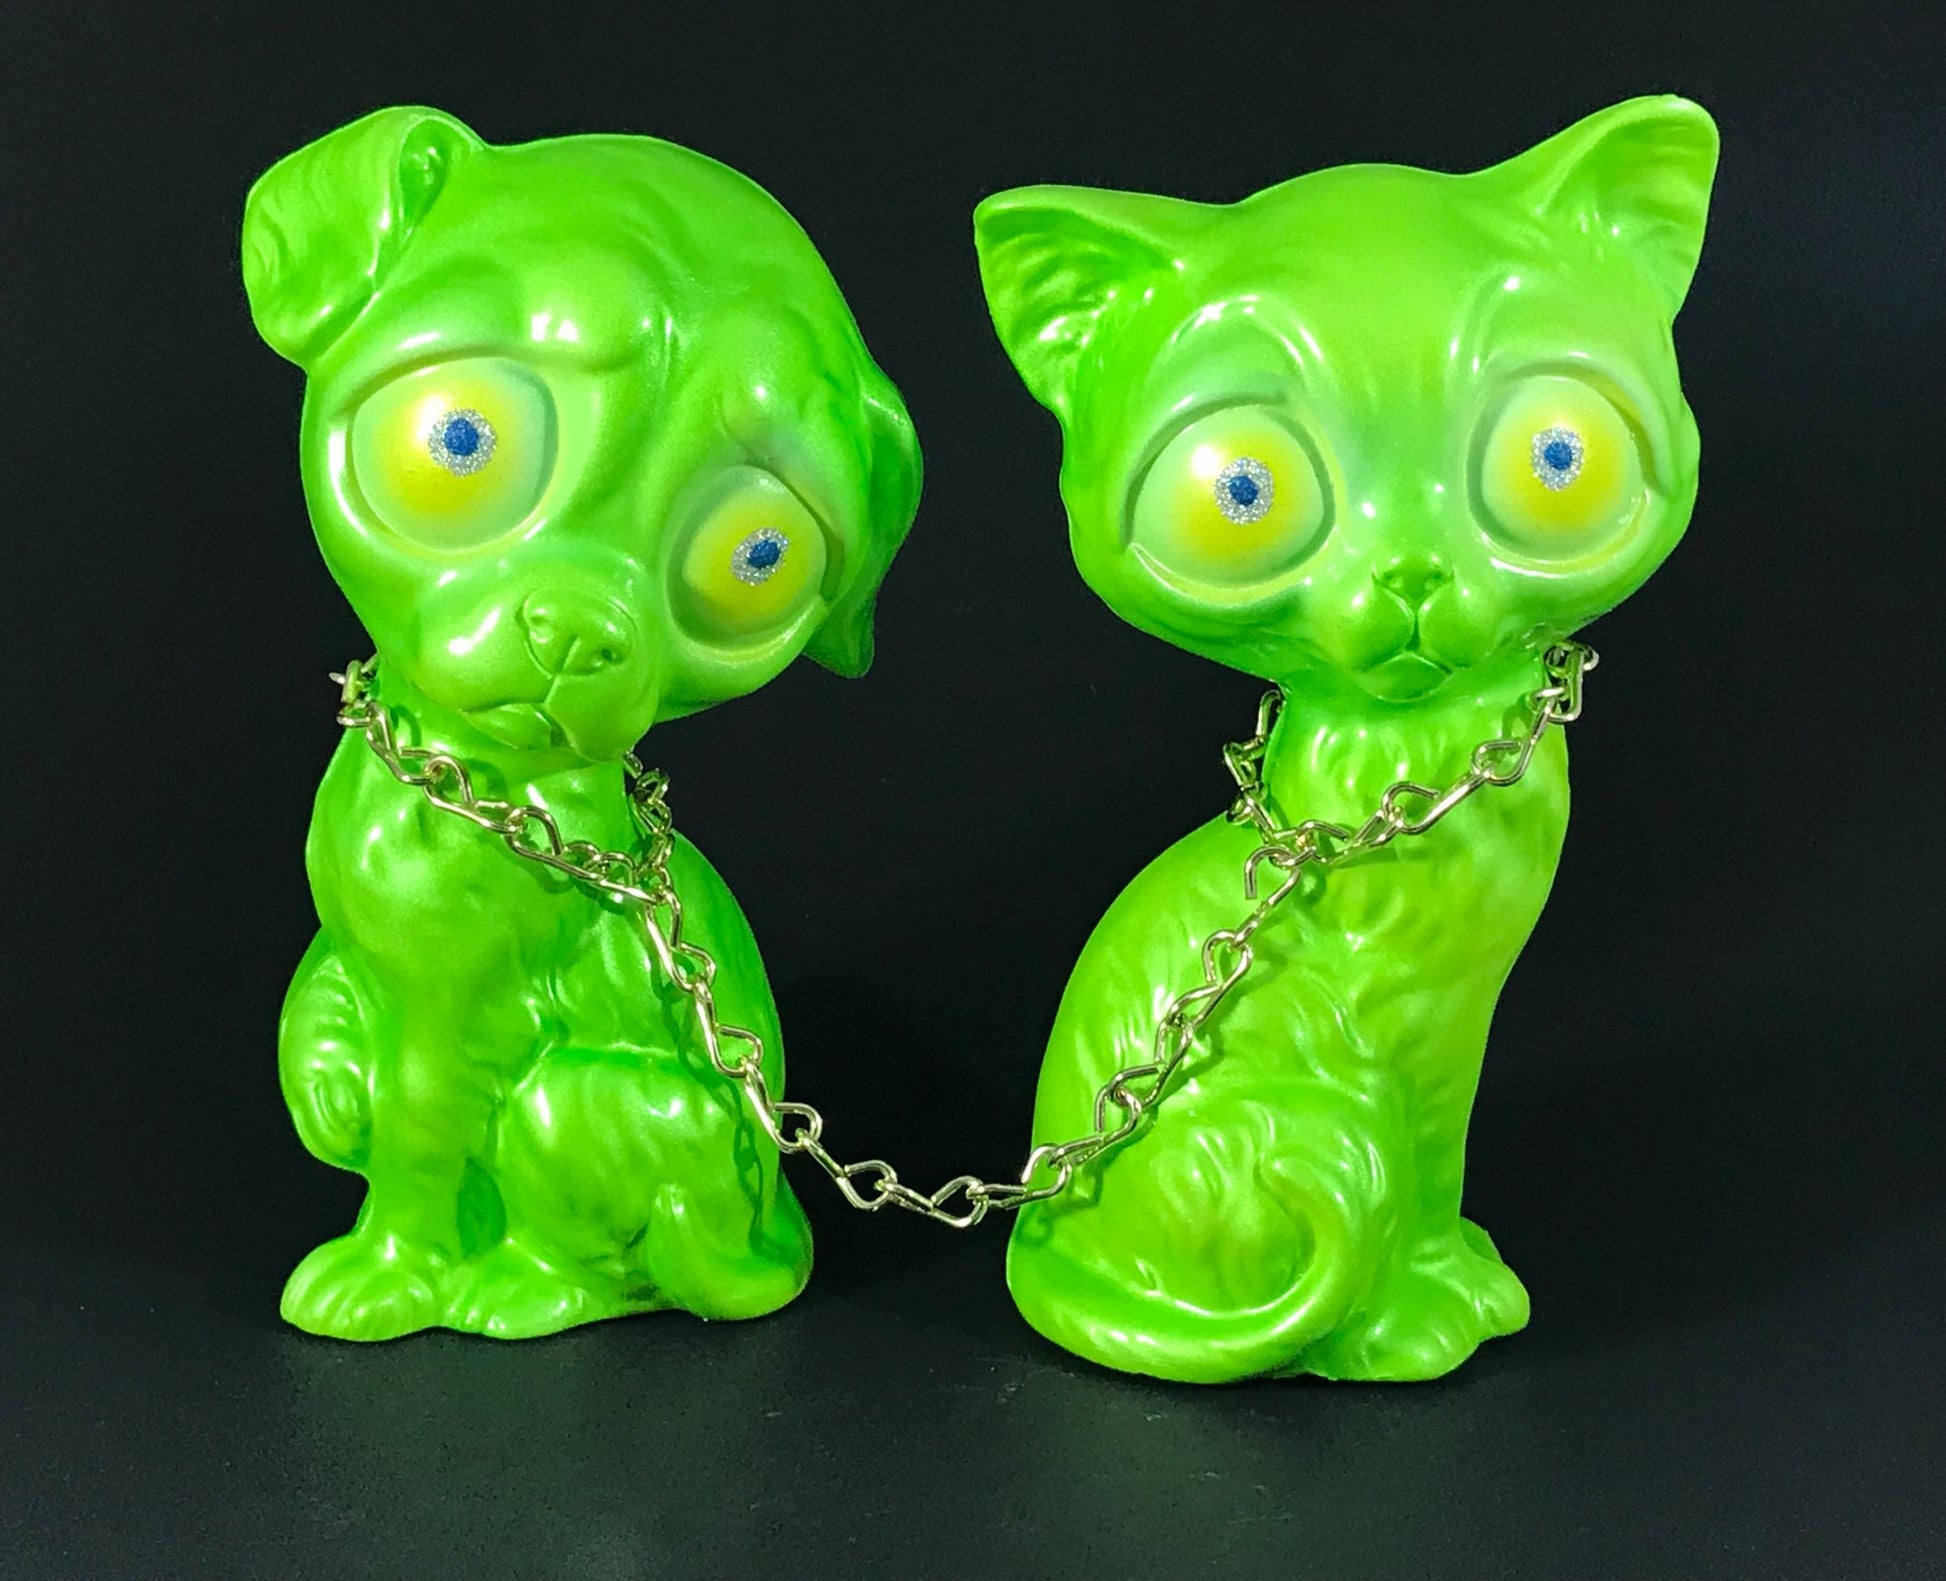 Chained sad dog and sad cat, iridescent green with metal flake/glitter eyes